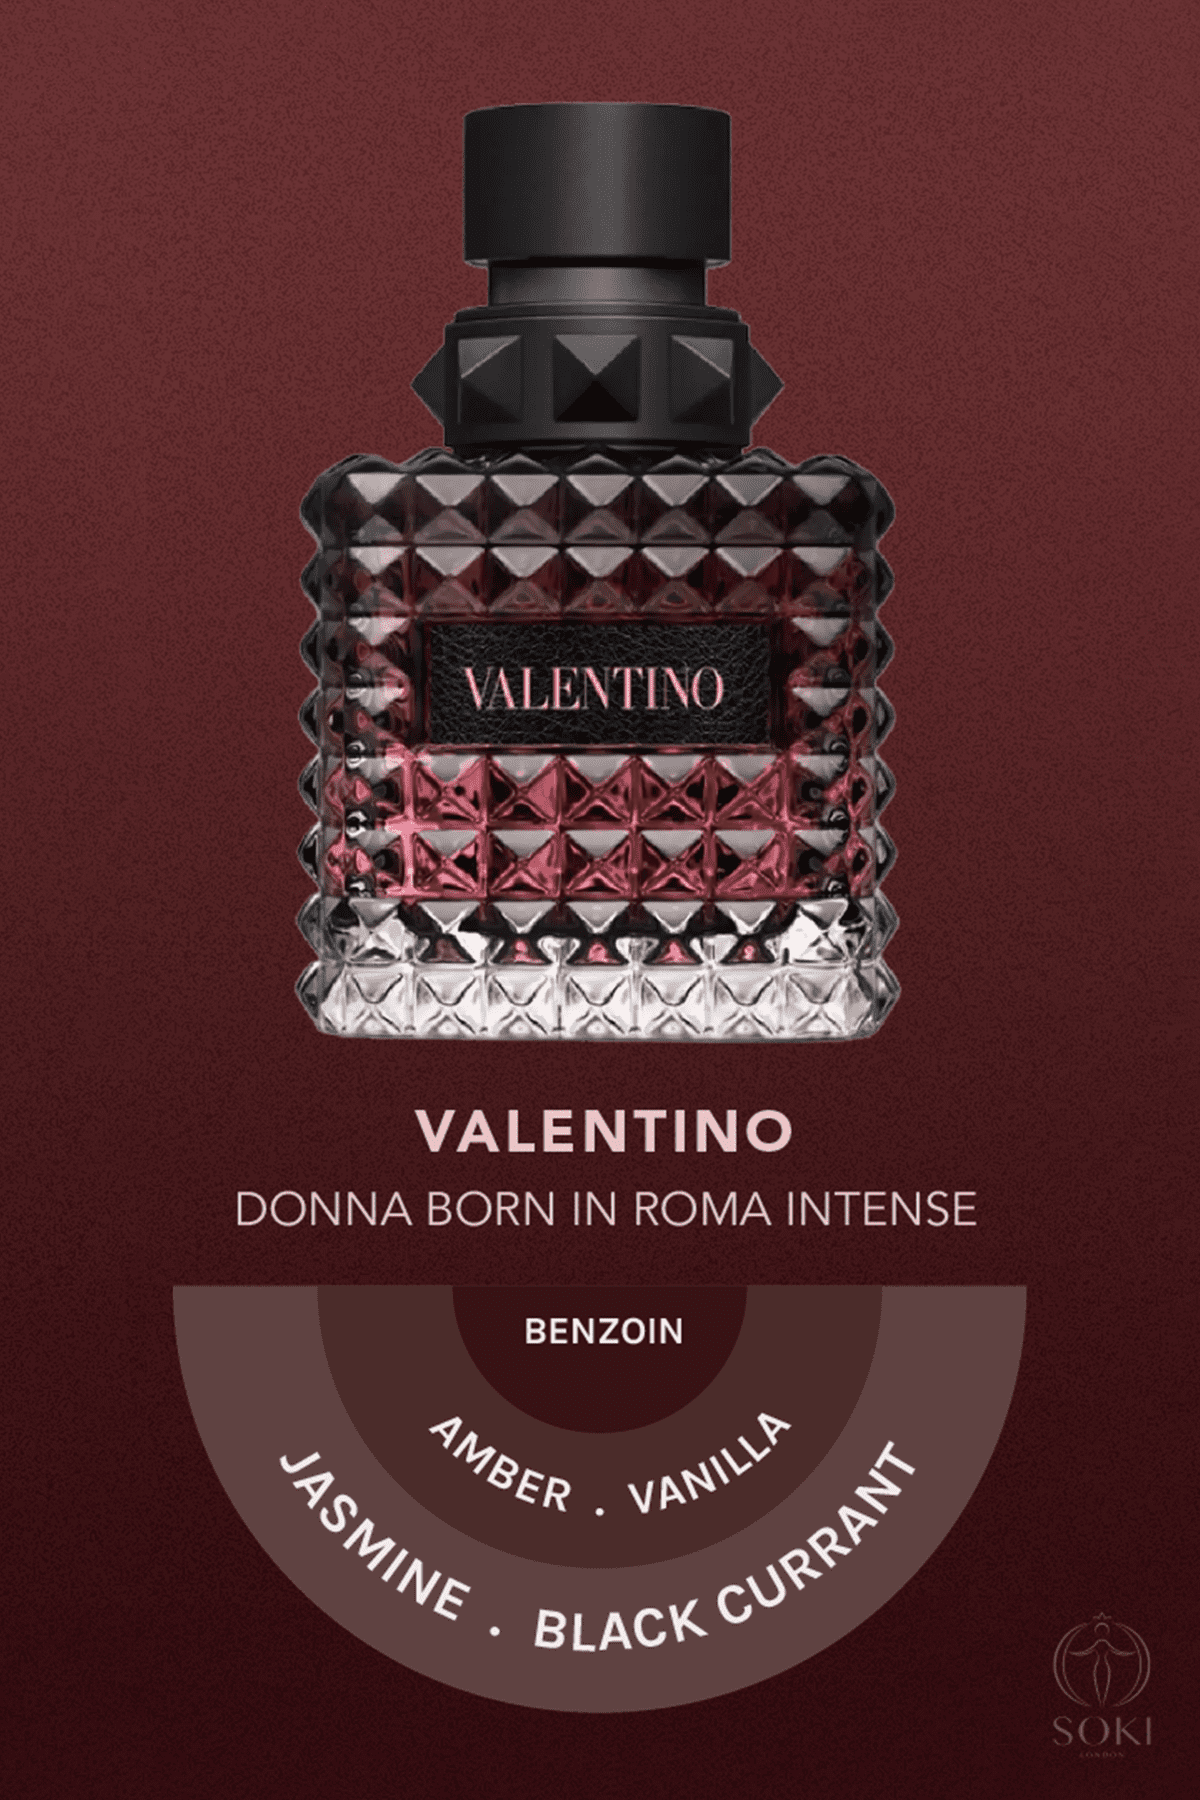 Which Is The Best Valentino Donna Born In Roma Perfume? | SOKI LONDON